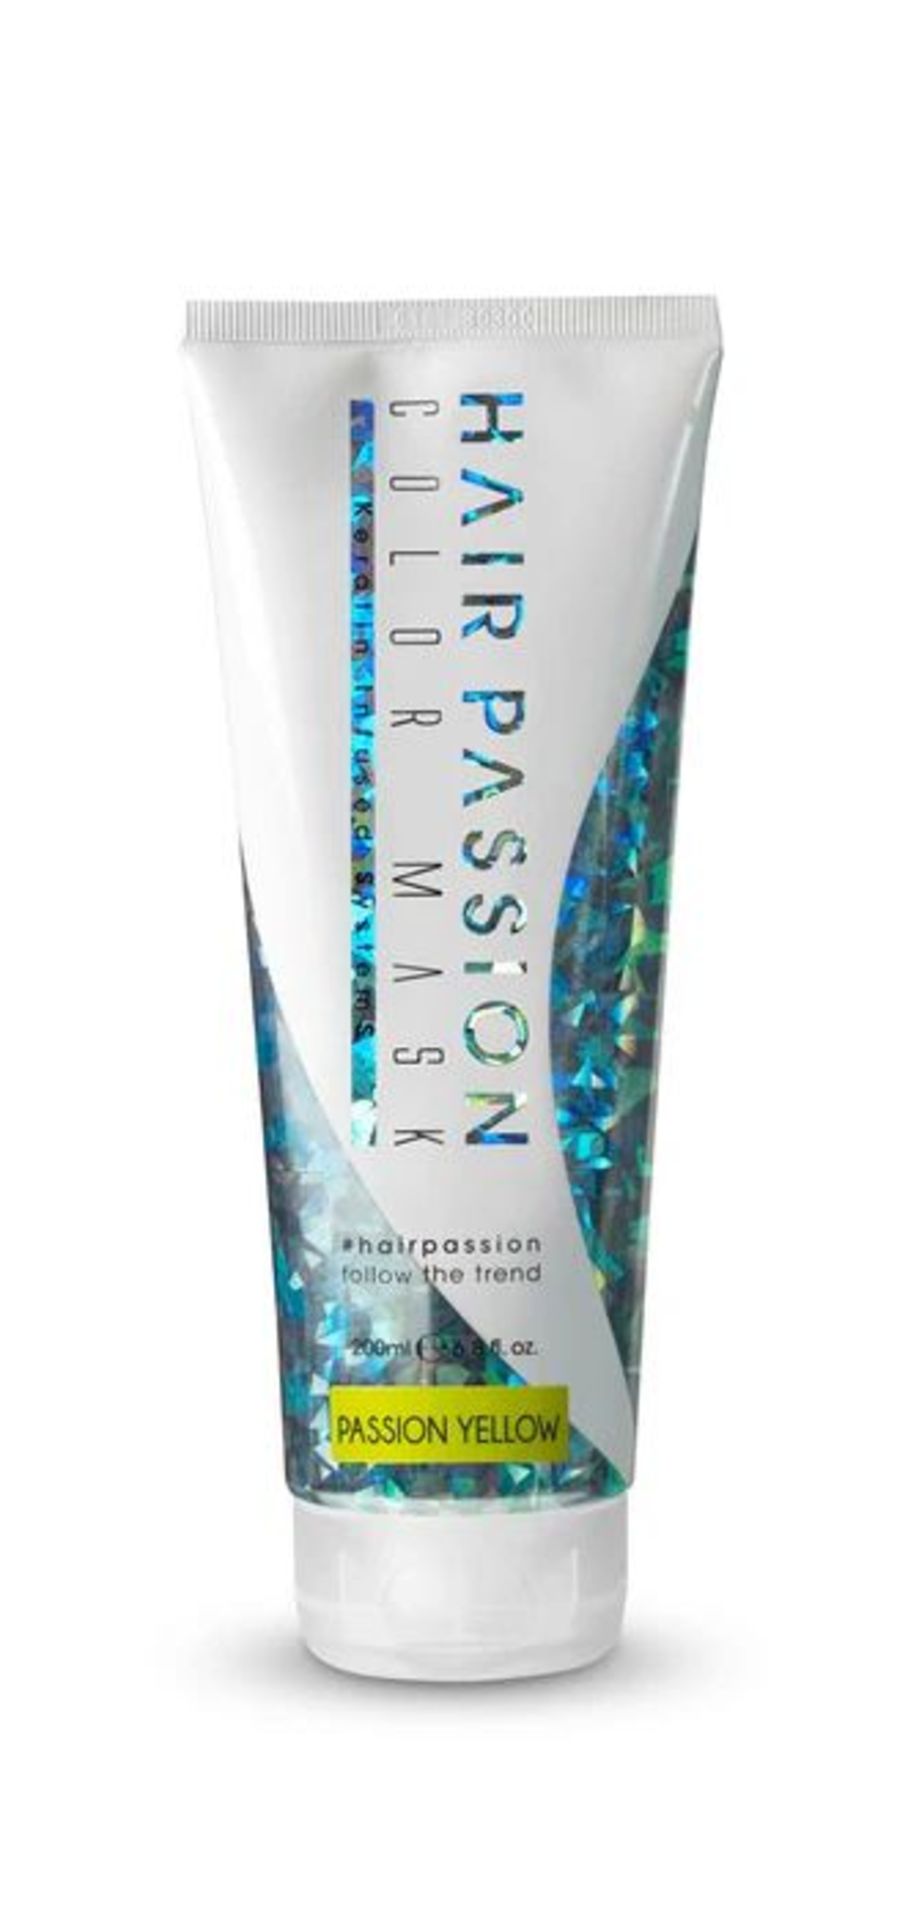 240 X BRAND NEW HAIR PASSION 200ML COLOUR MASKS IN VARIOUS COLOURS S1R6